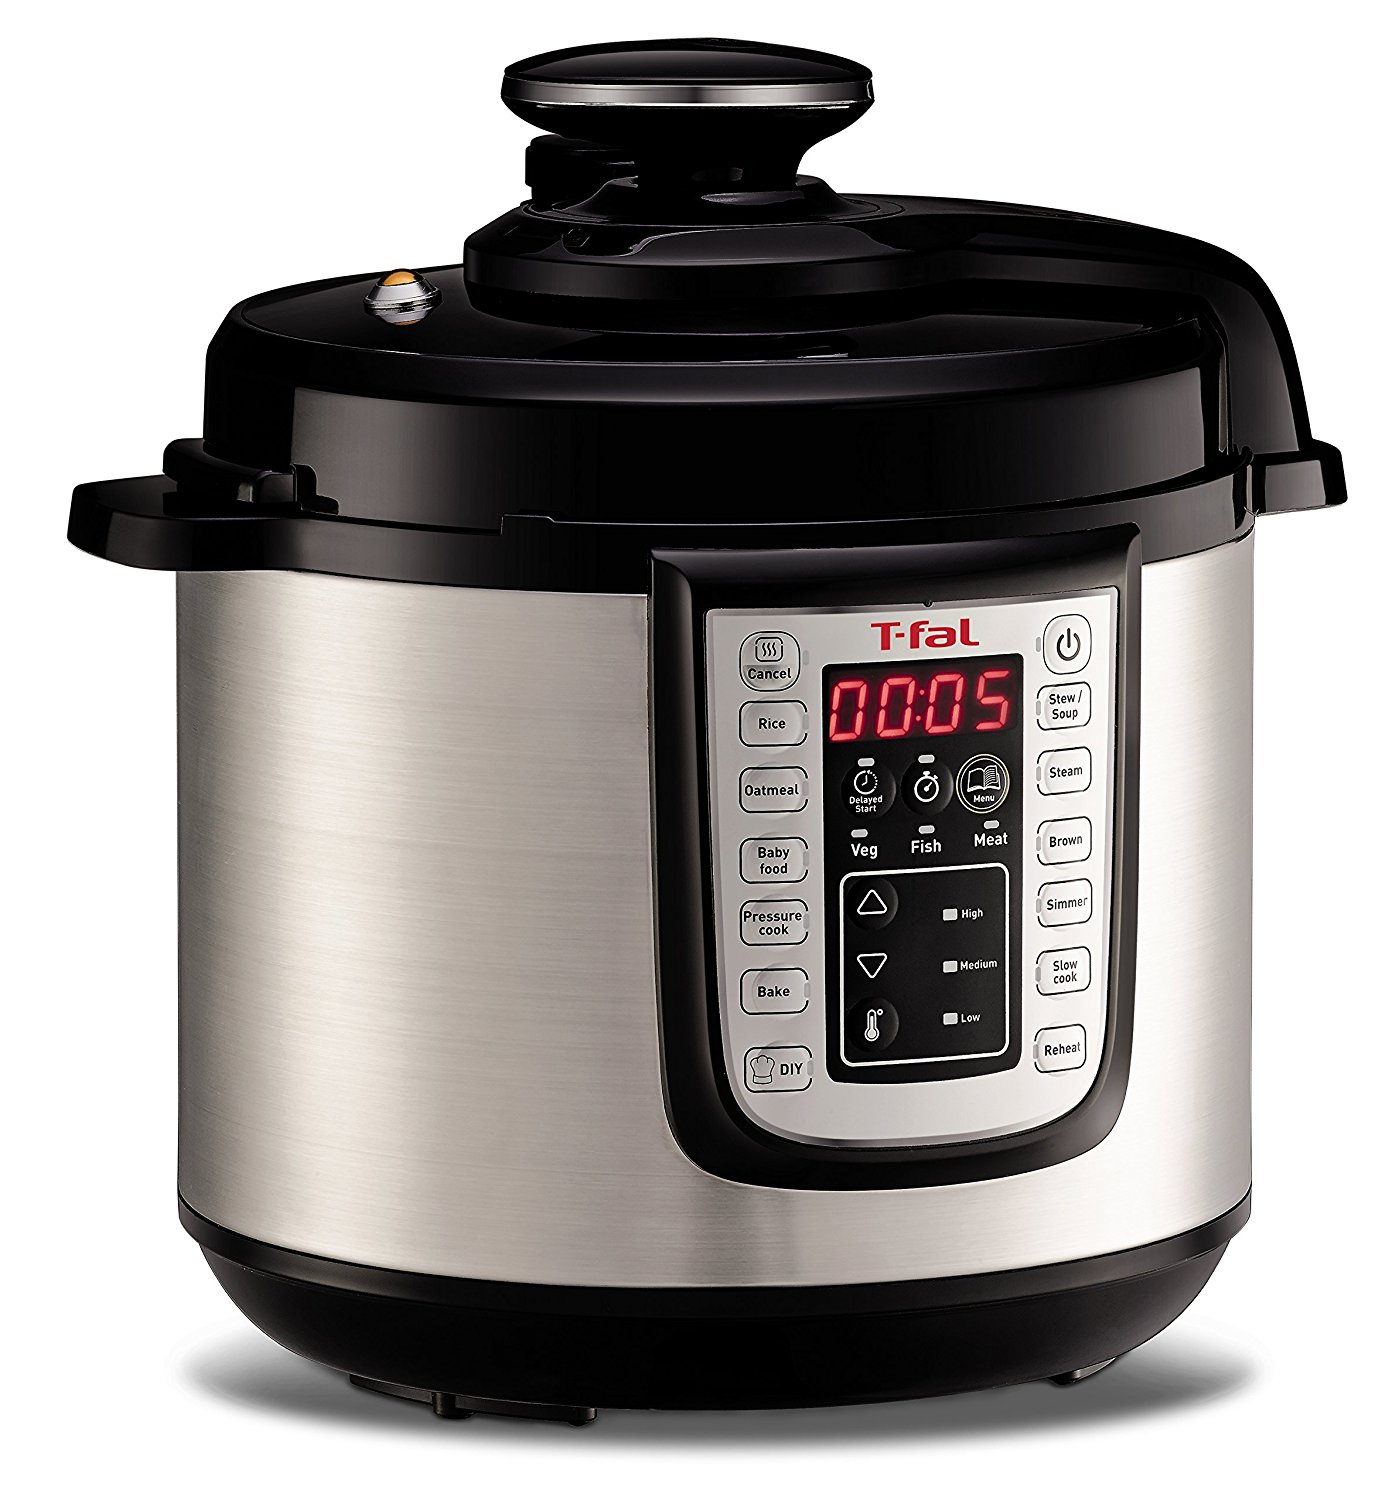 Today only: T-Fal 6-quart programmable electric pressure cooker for $41, free shipping